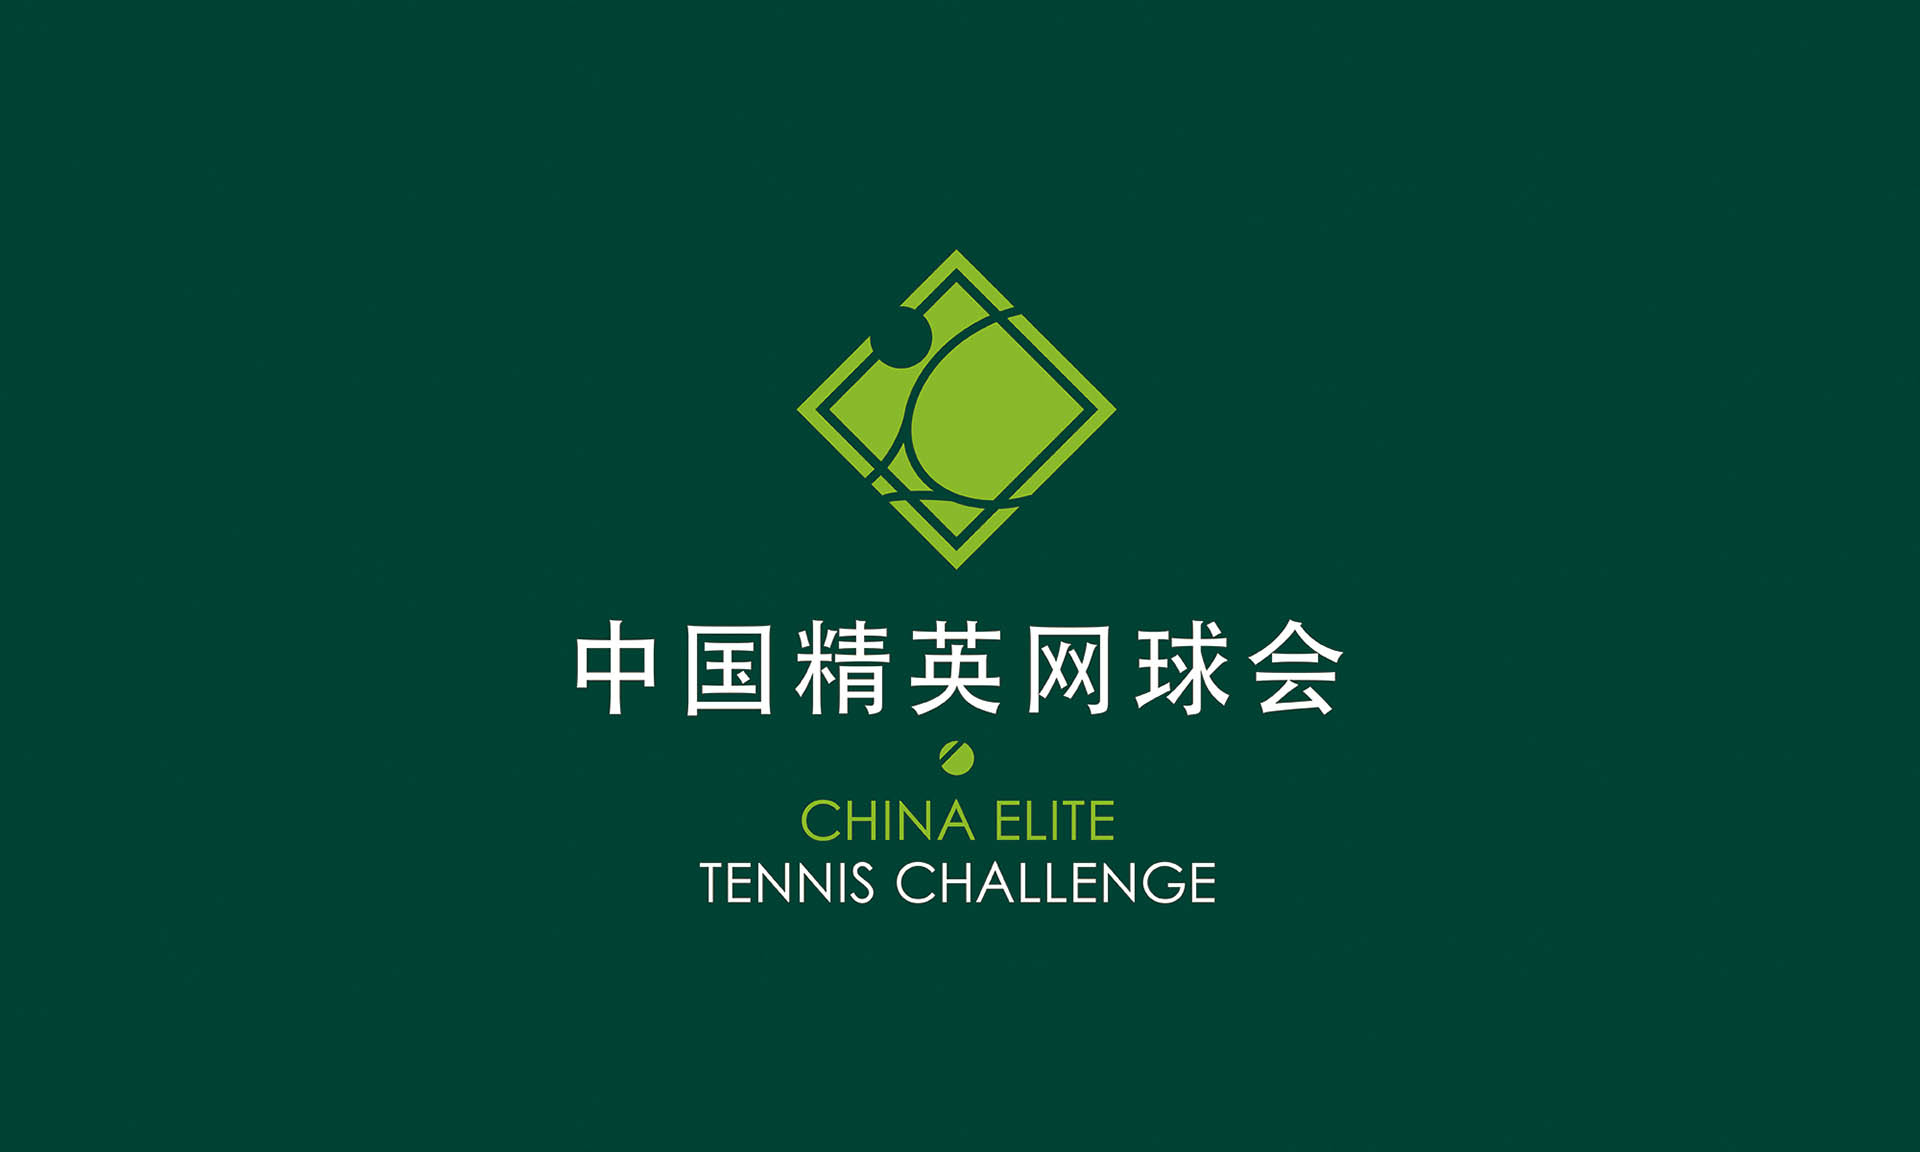 Visual identity for China Elite Tennis Challenge where celebrities play tennis with world top ranked players